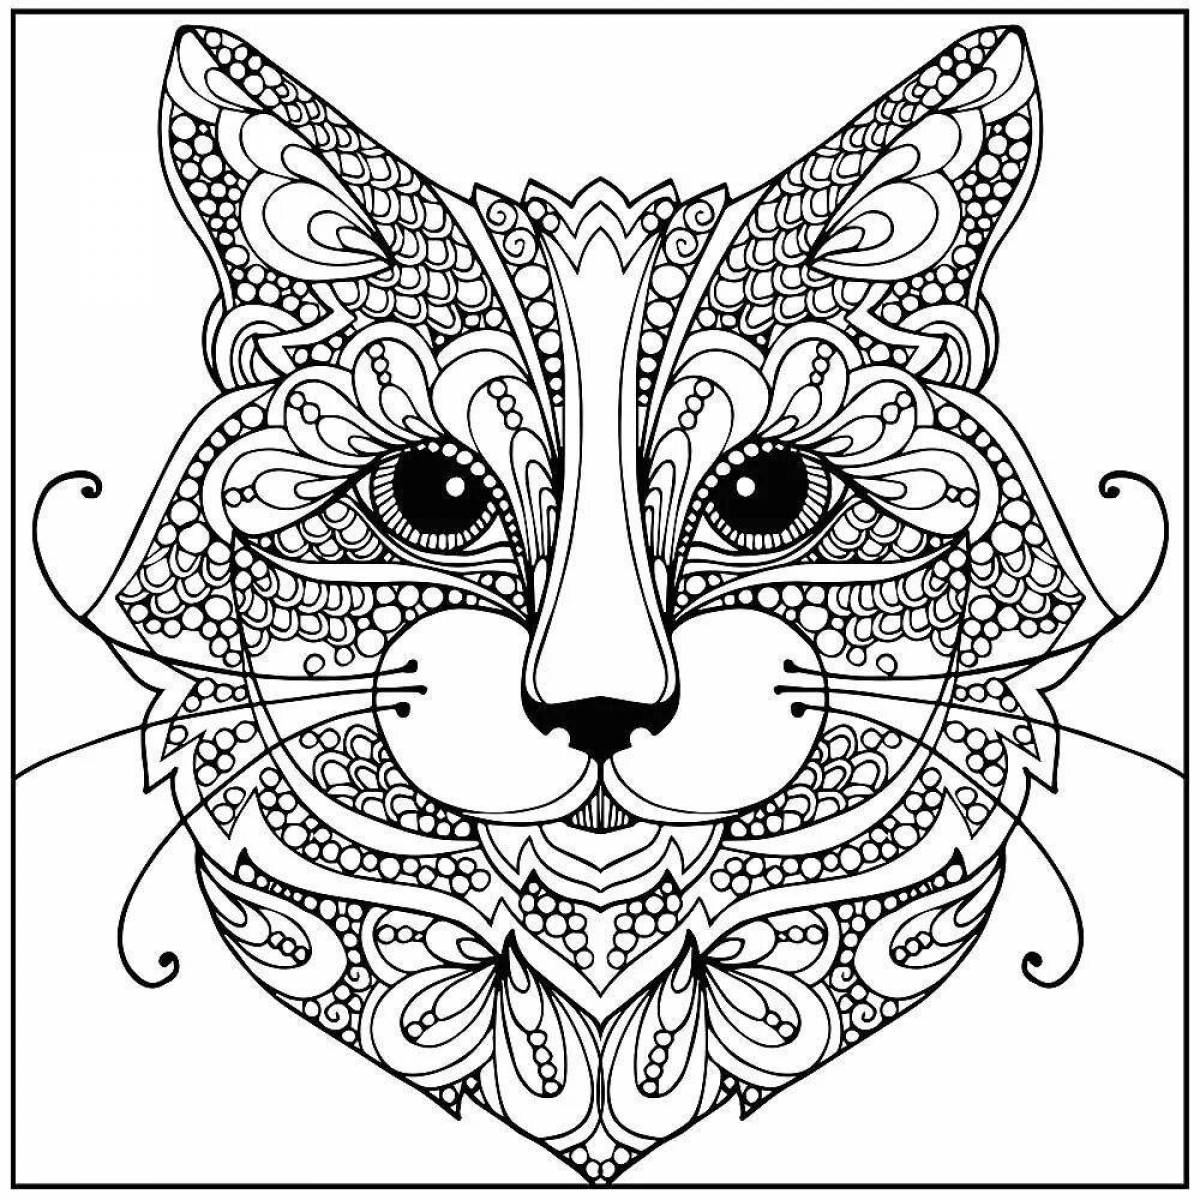 Coloring simple pencil antistress coloring page